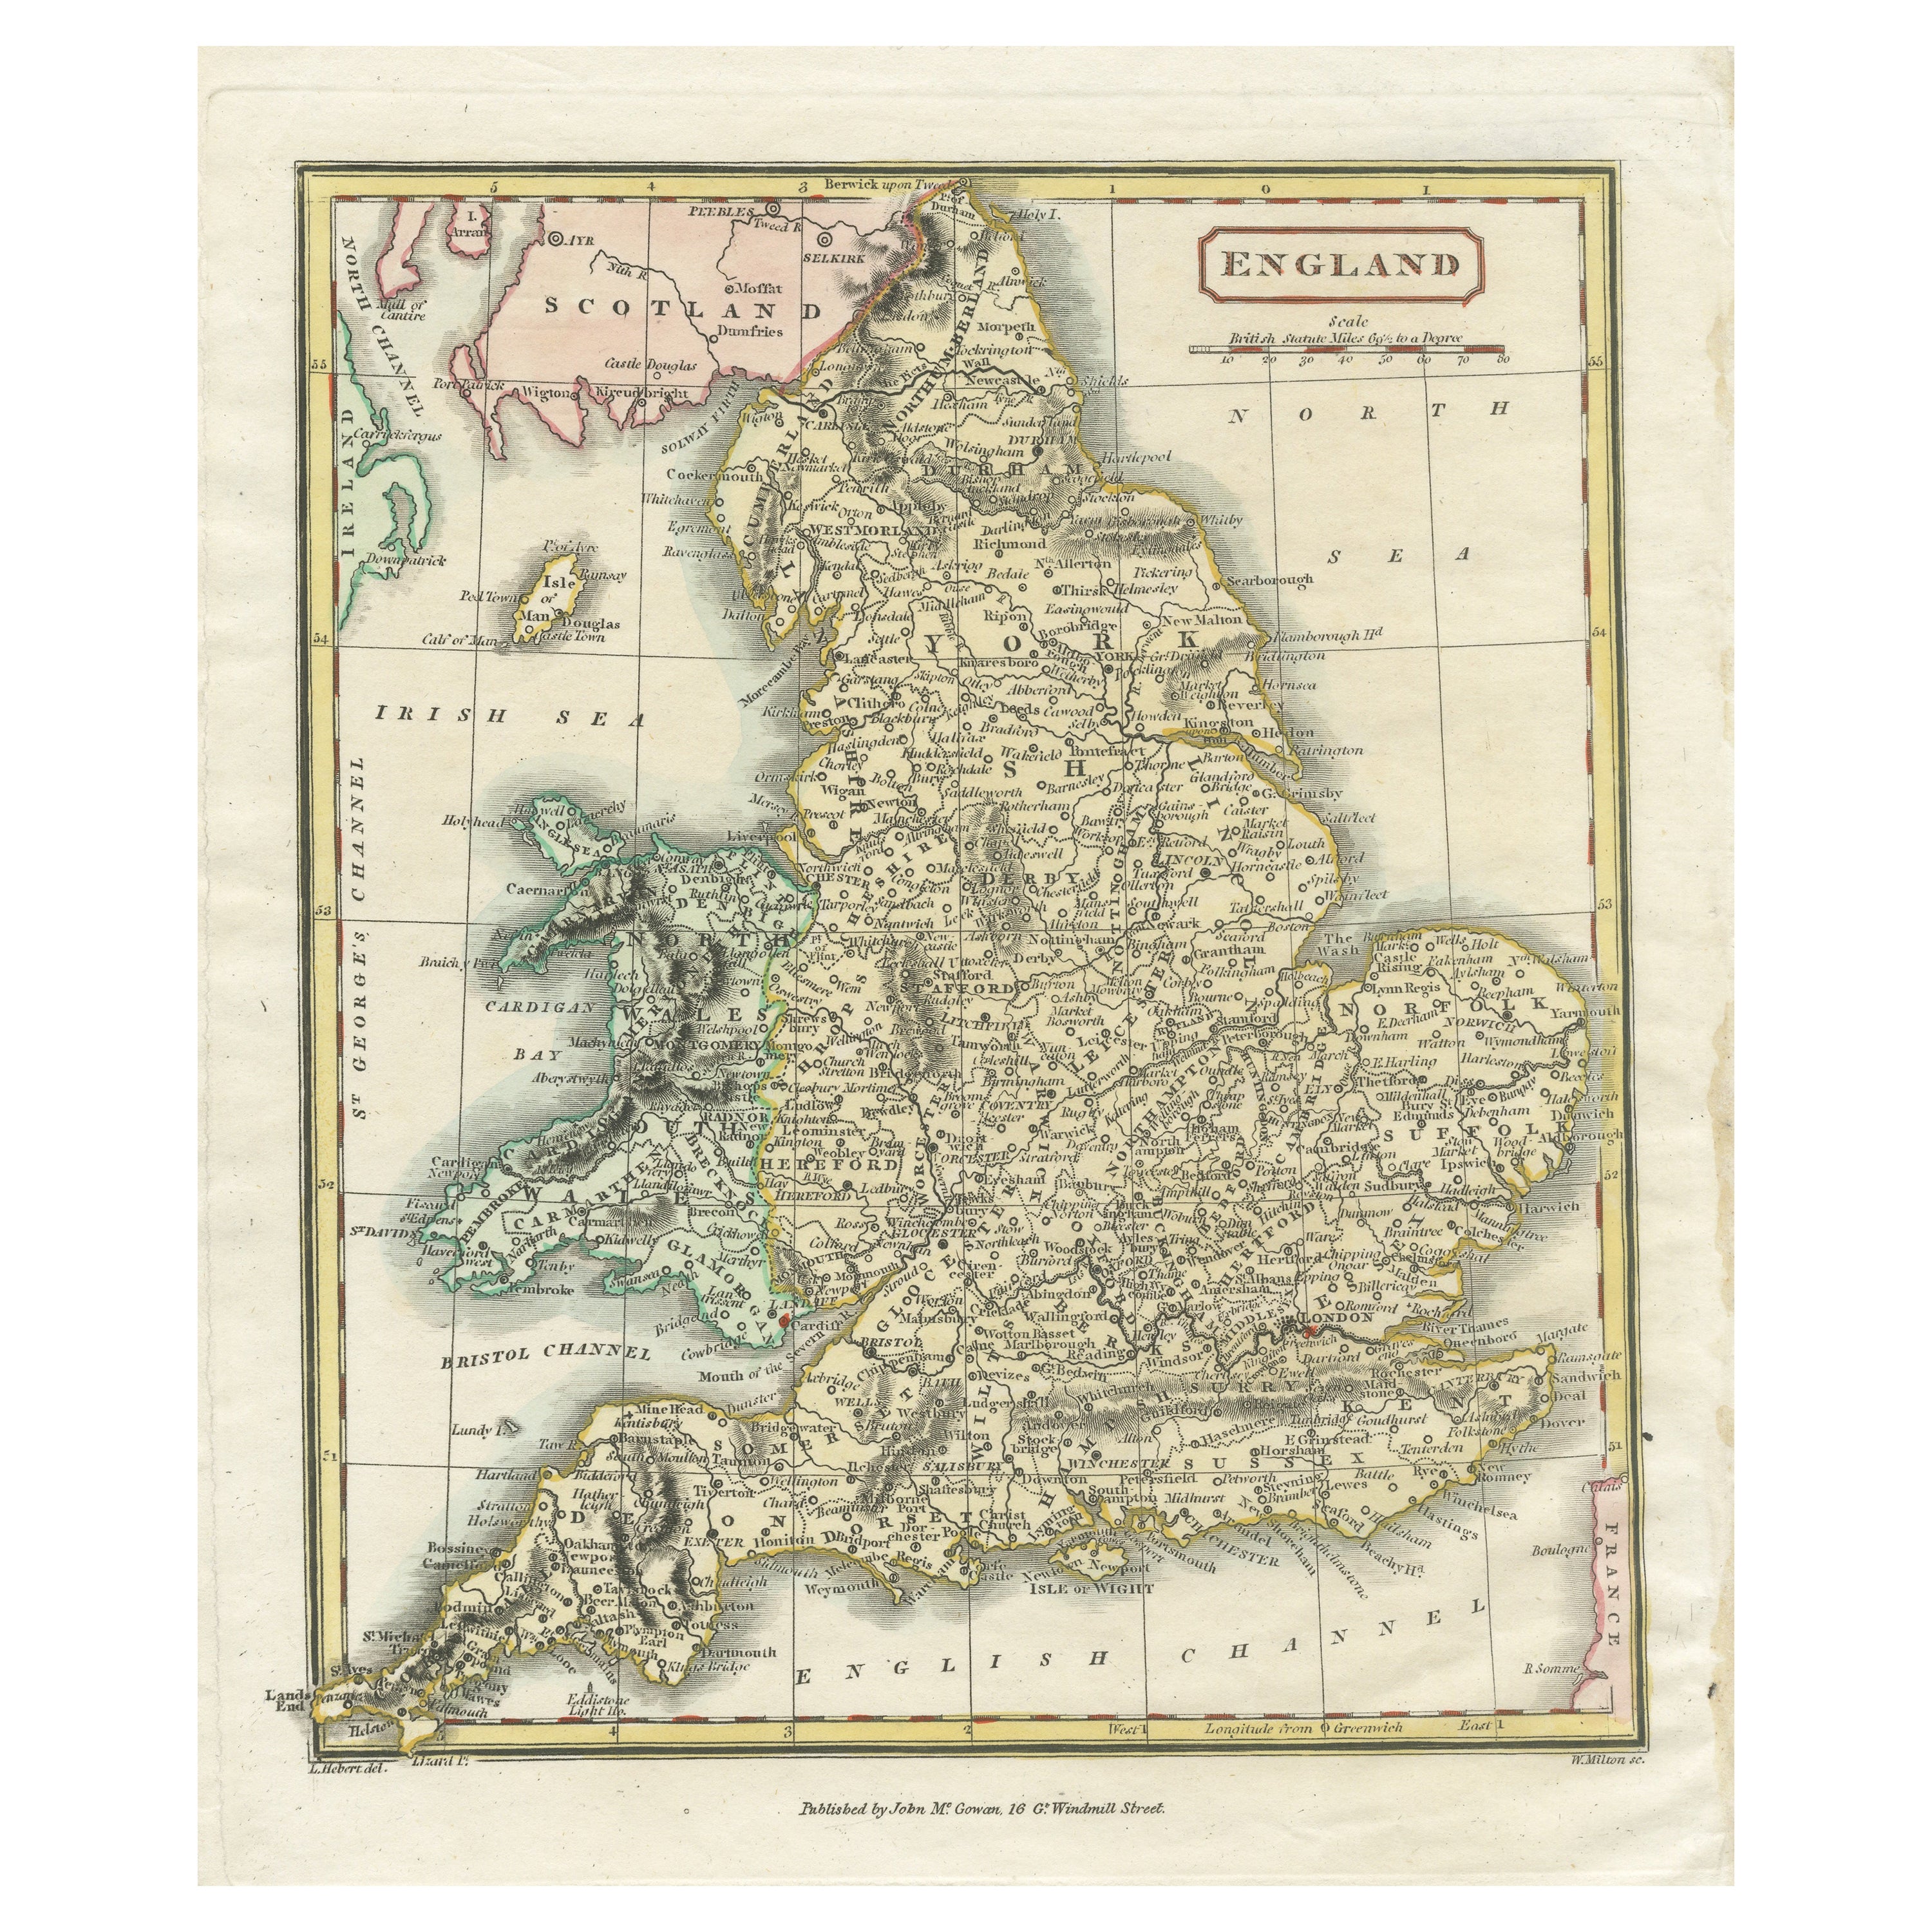 Original Antique Map of England with Hand Coloring For Sale